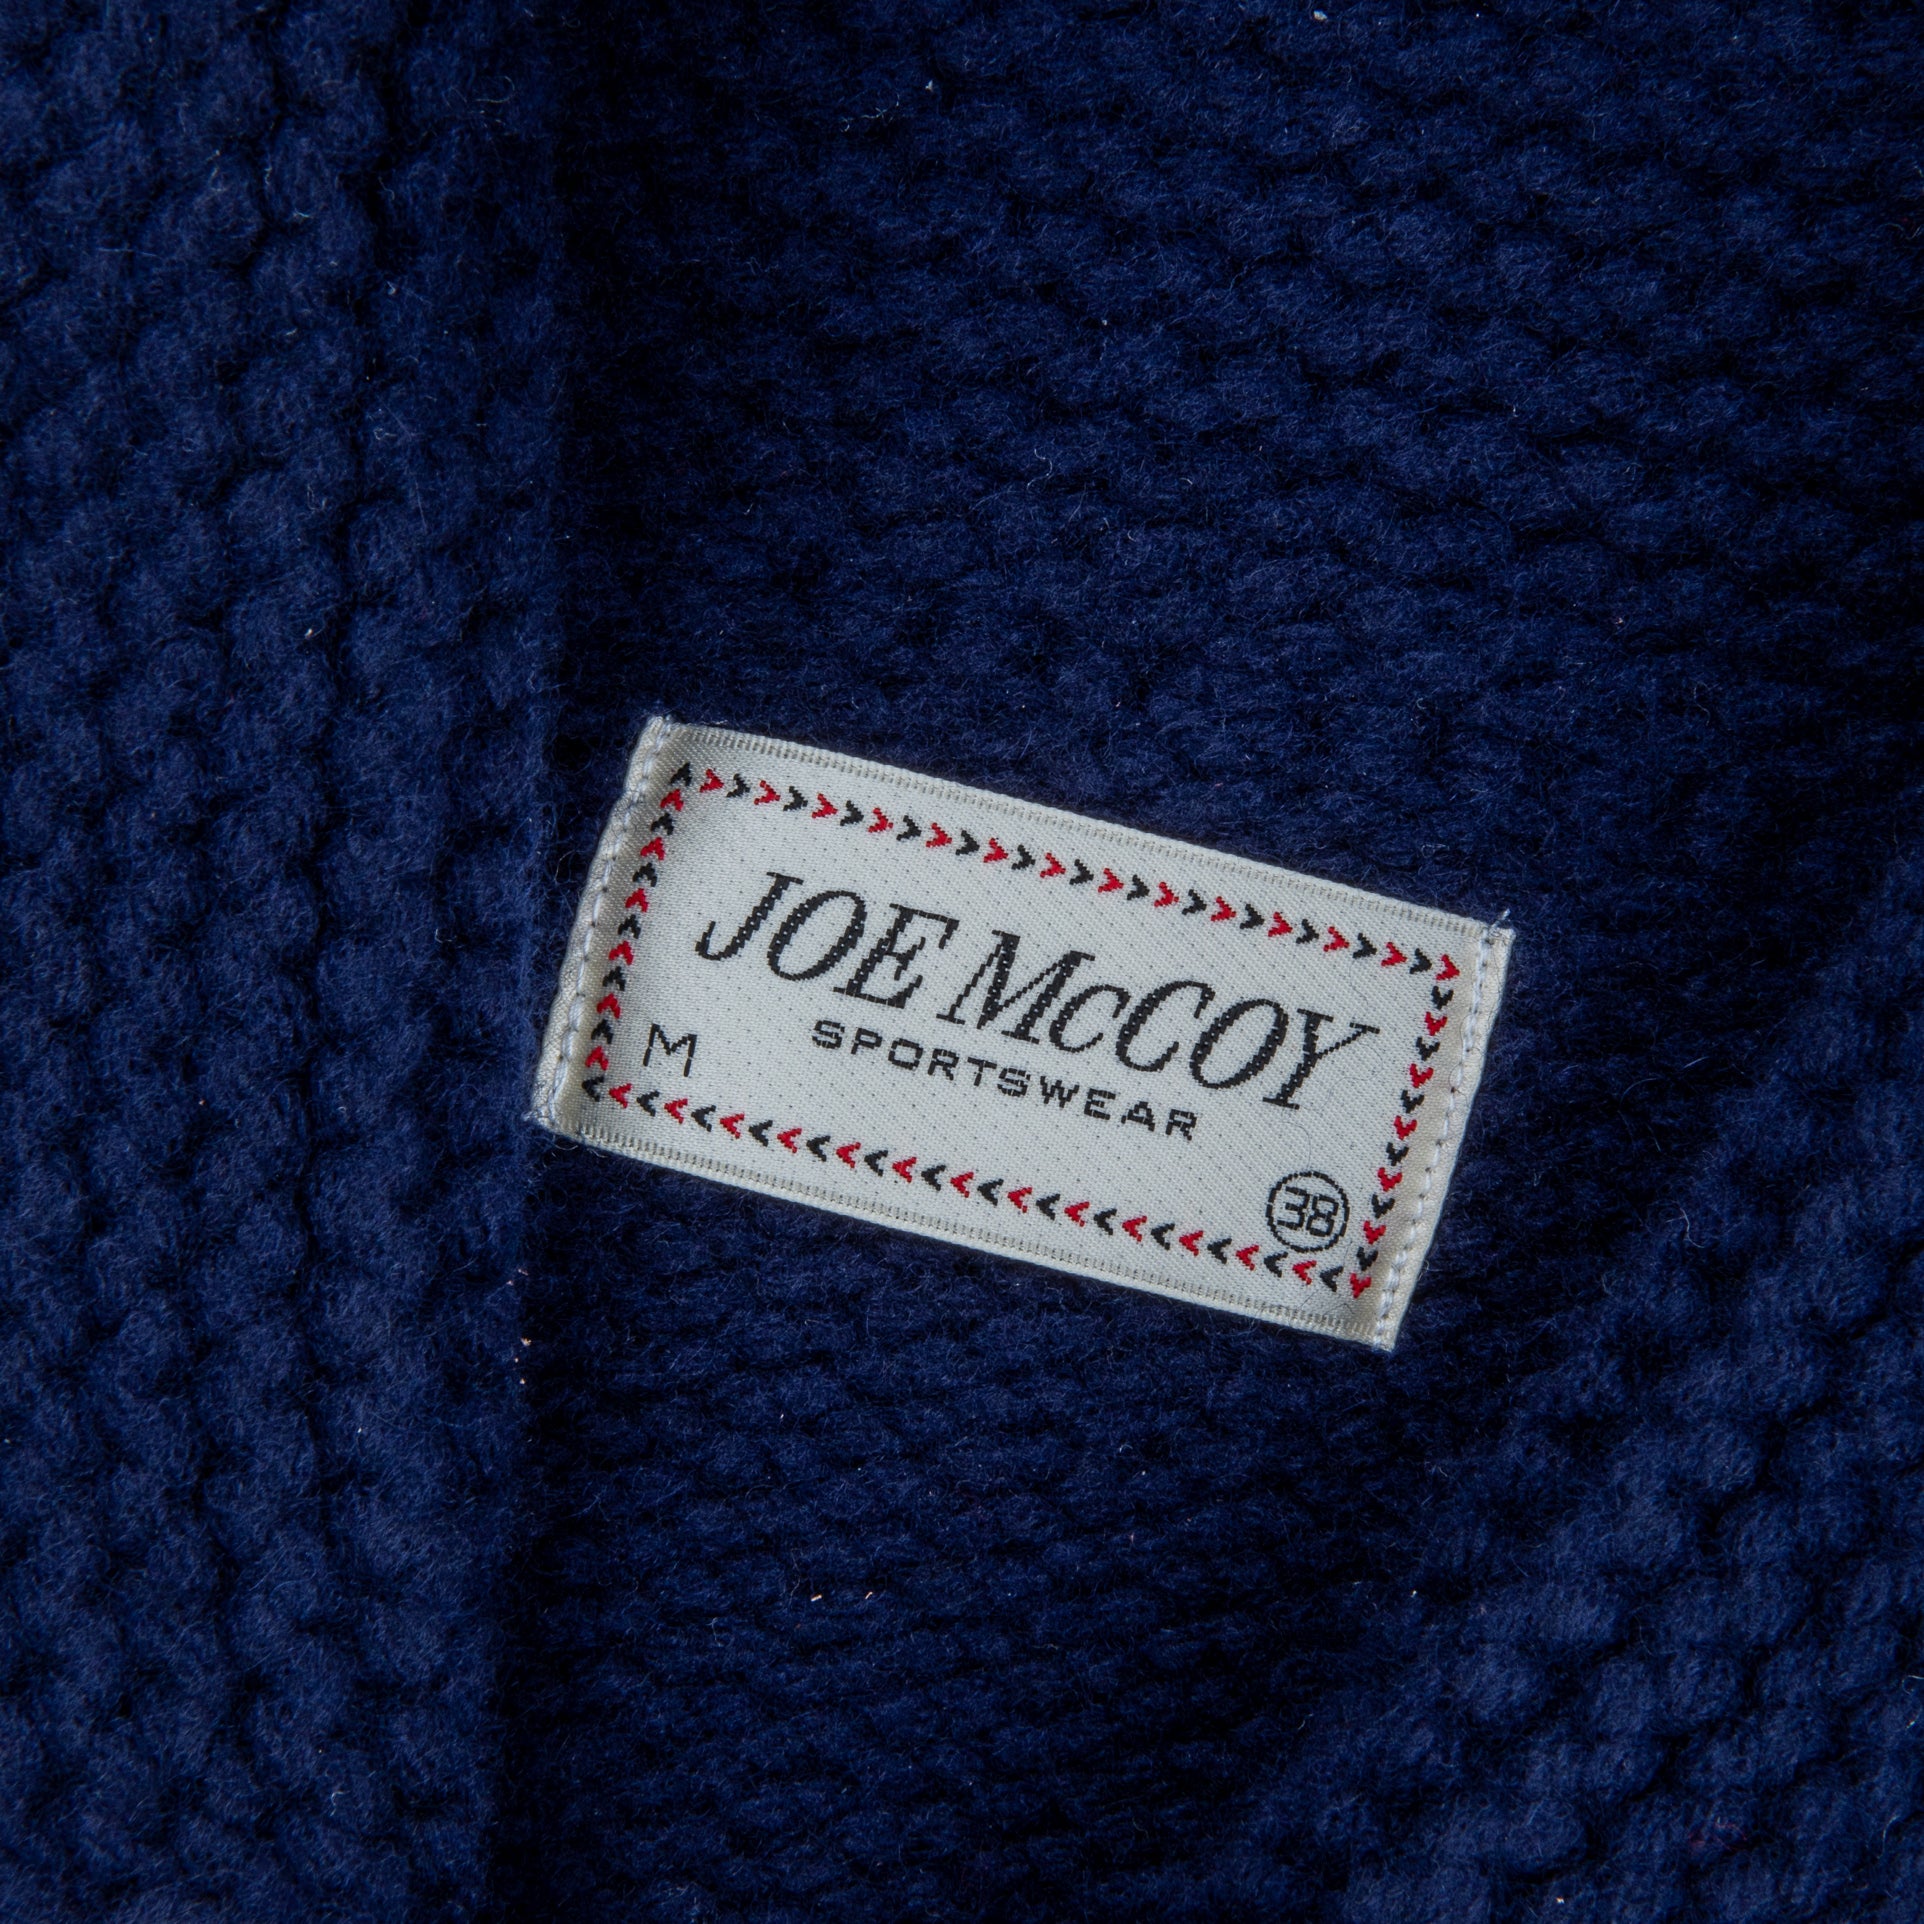 The Real McCoys Wool &amp; Cashmere Cowichan Cardigan Navy